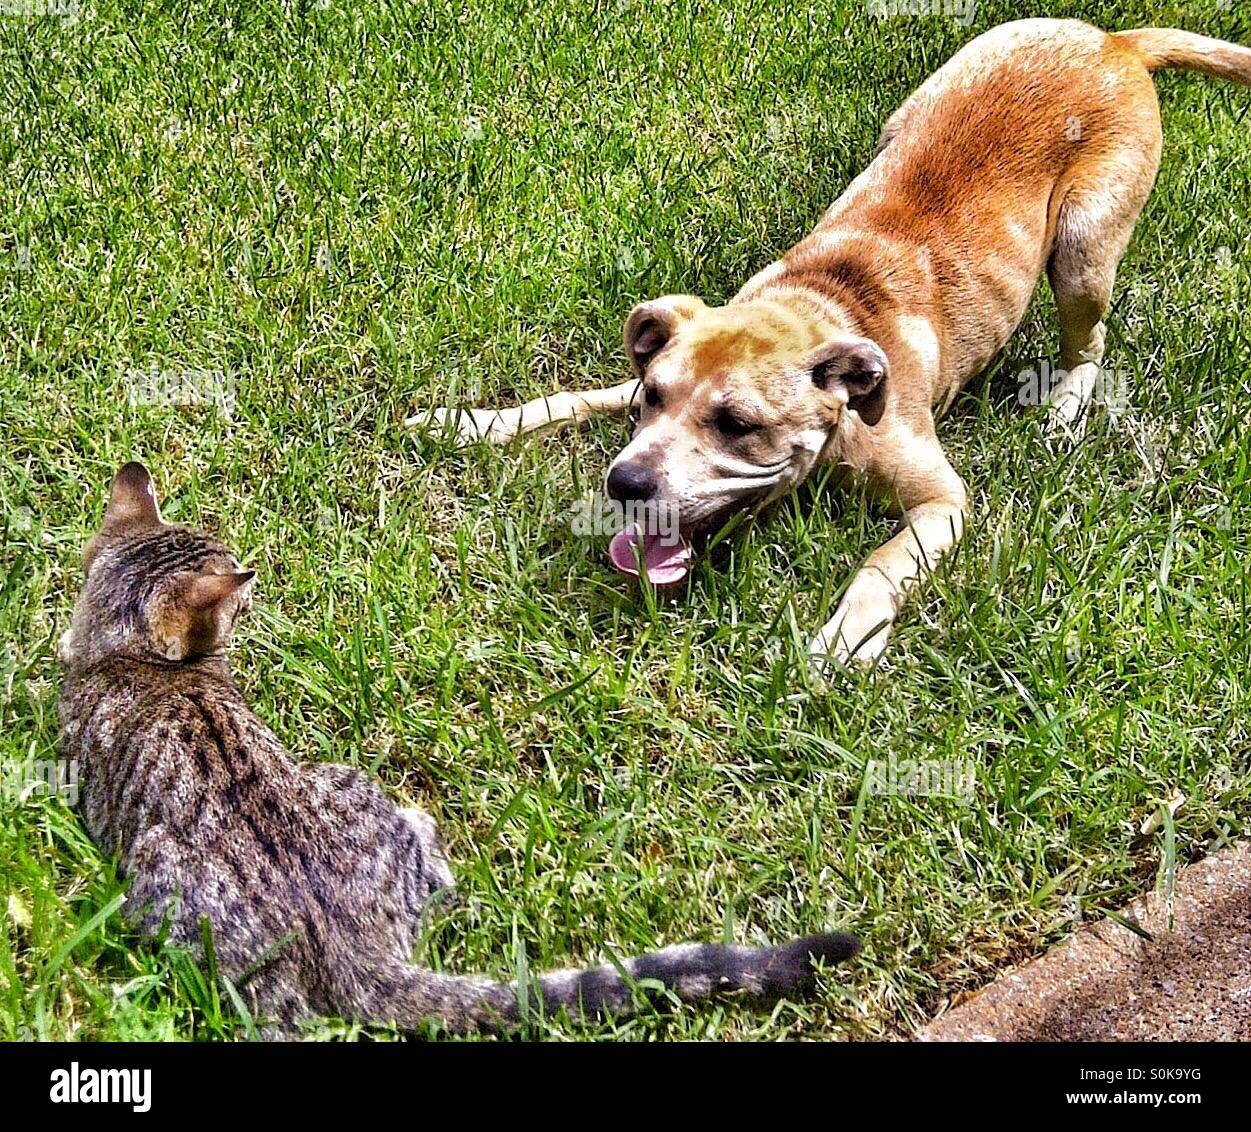 Dog plays with cat Stock Photo